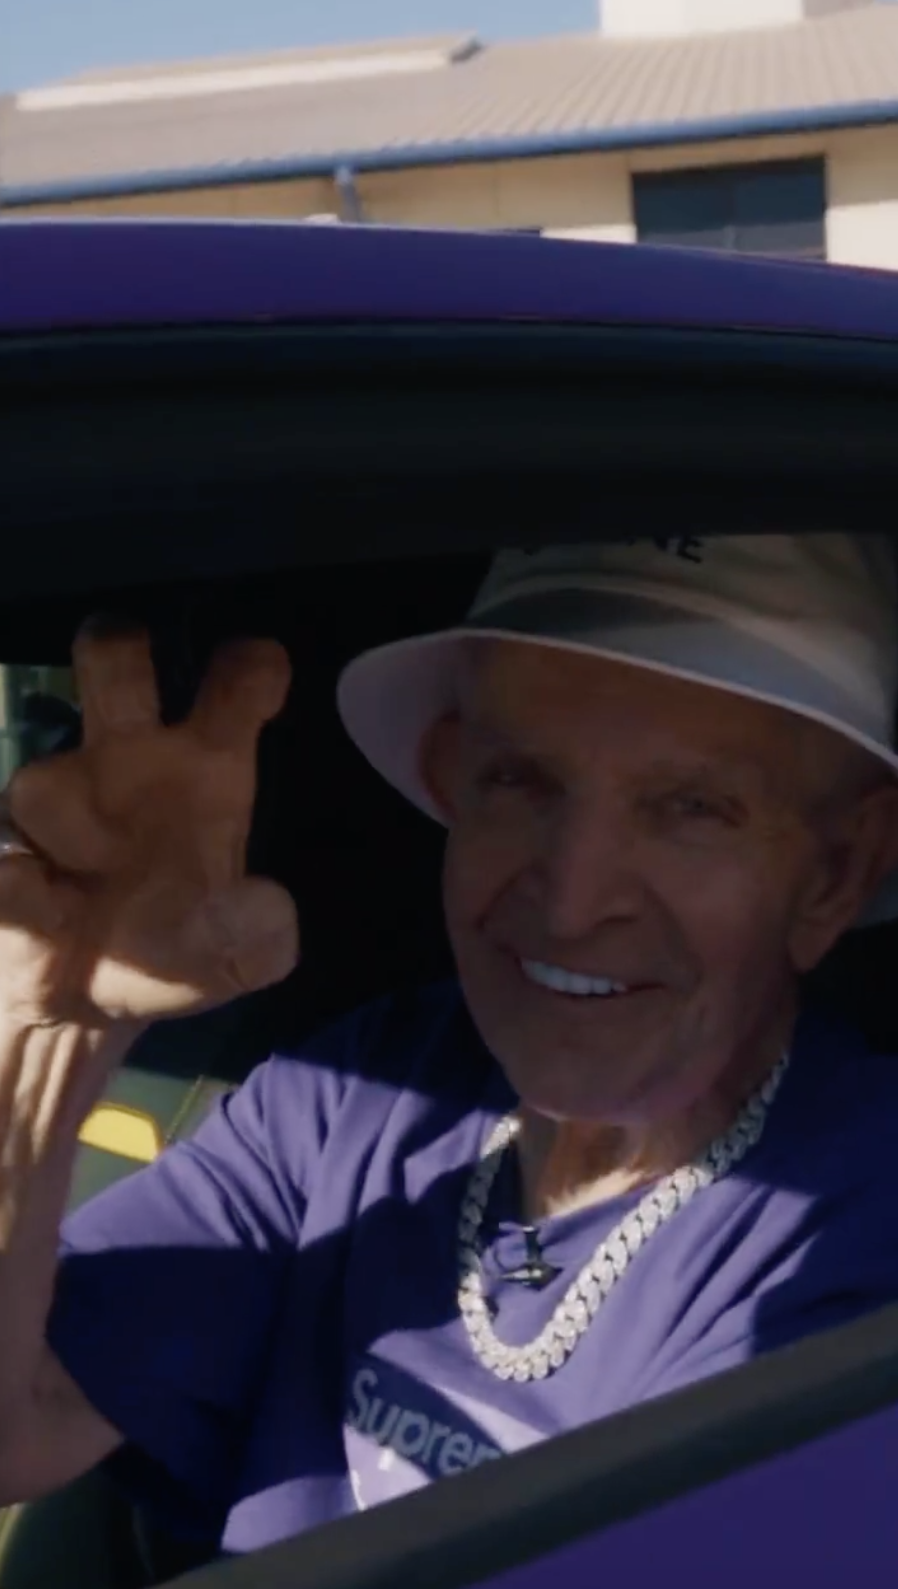 Mattress Mack TCU Hype Video 🐸  Highlights and Live Video from